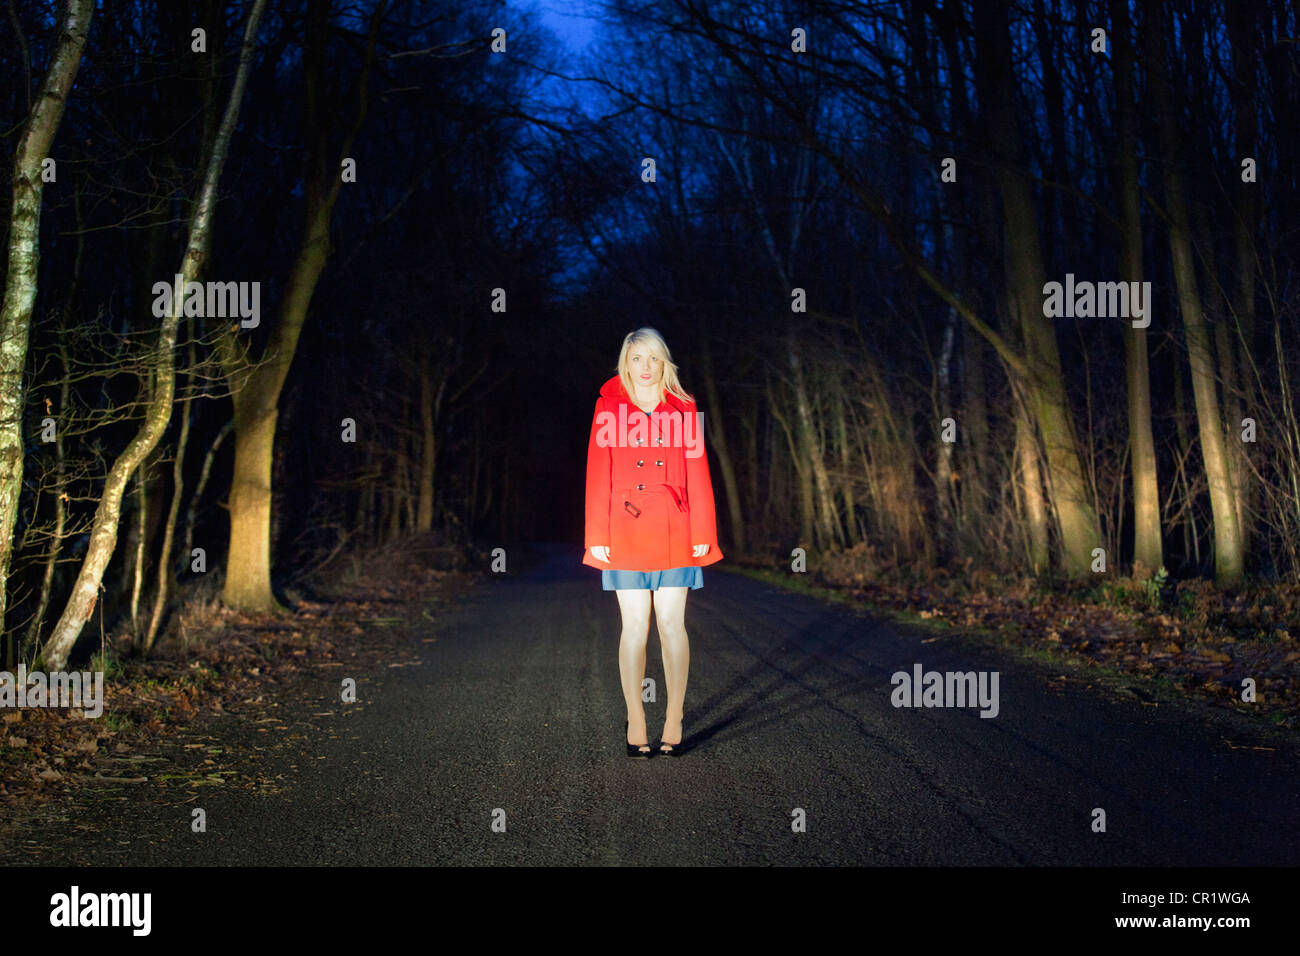 Woman standing on road in woods Stock Photo